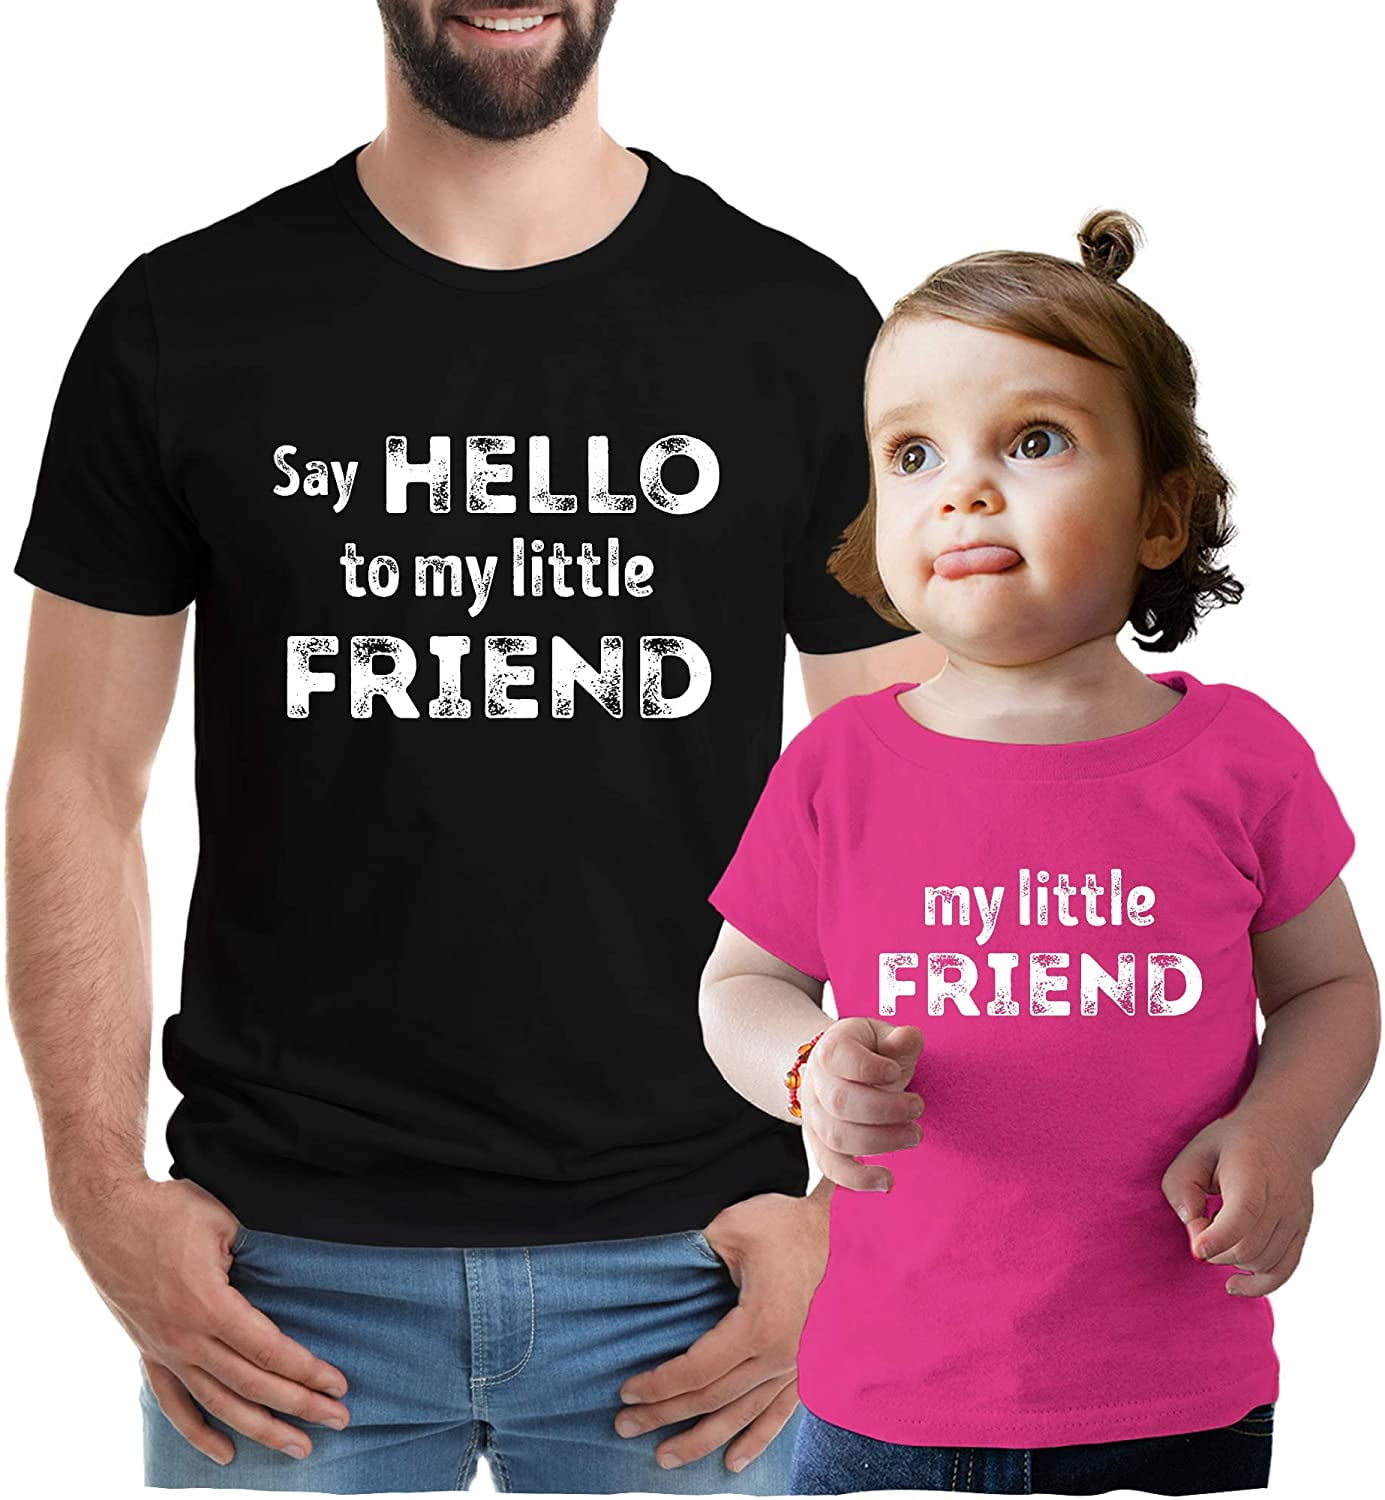 Texas Tees, Dad and Kids Matching Shirts, Matching Father Daughter Shirts,  Pink Little Friend & Say Hello 